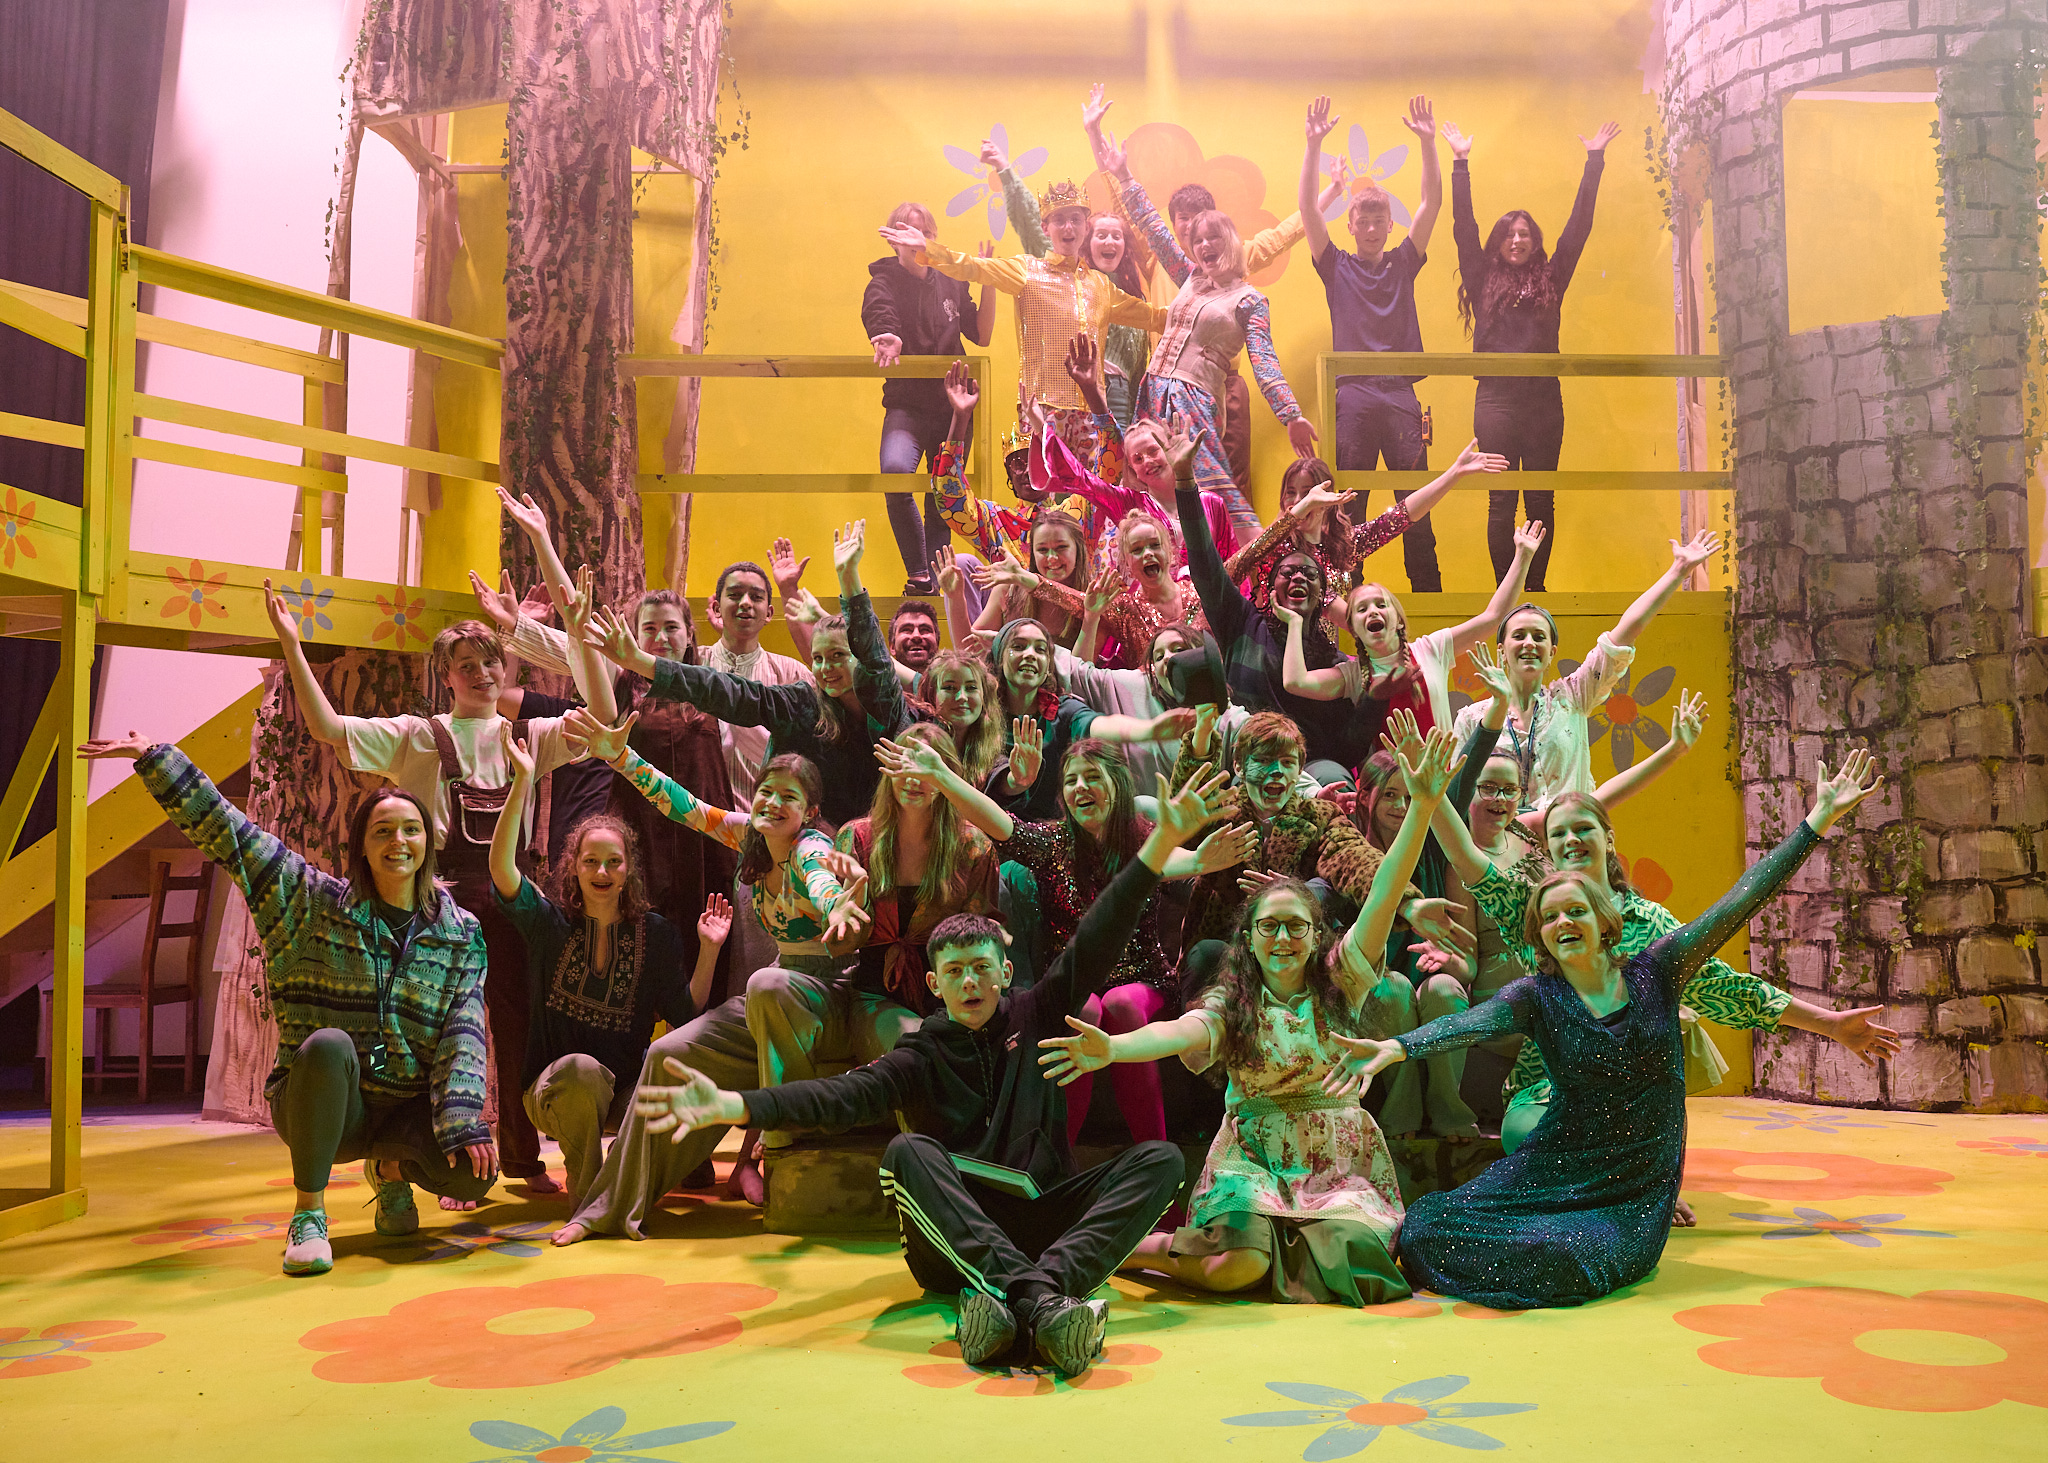 Lower School Musical 'Into The Woods' wows audience